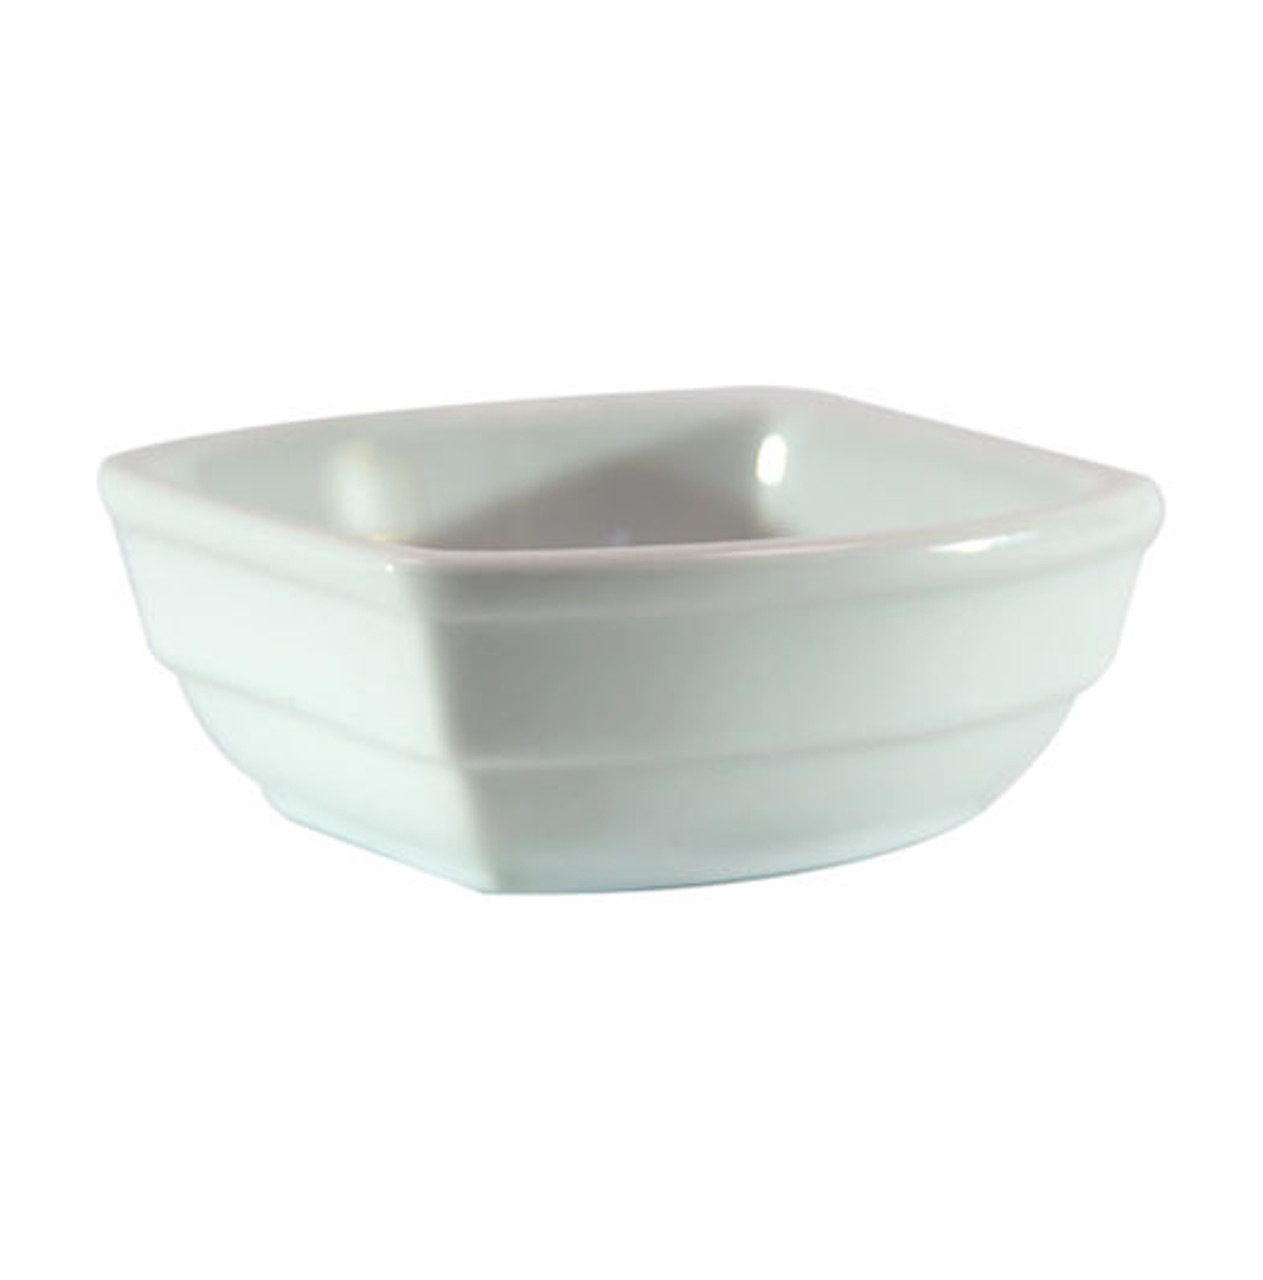 Porcelain Pure White Ramekin Butter and side dish or pads White 85 x 80 x 35mm CLEARANCE